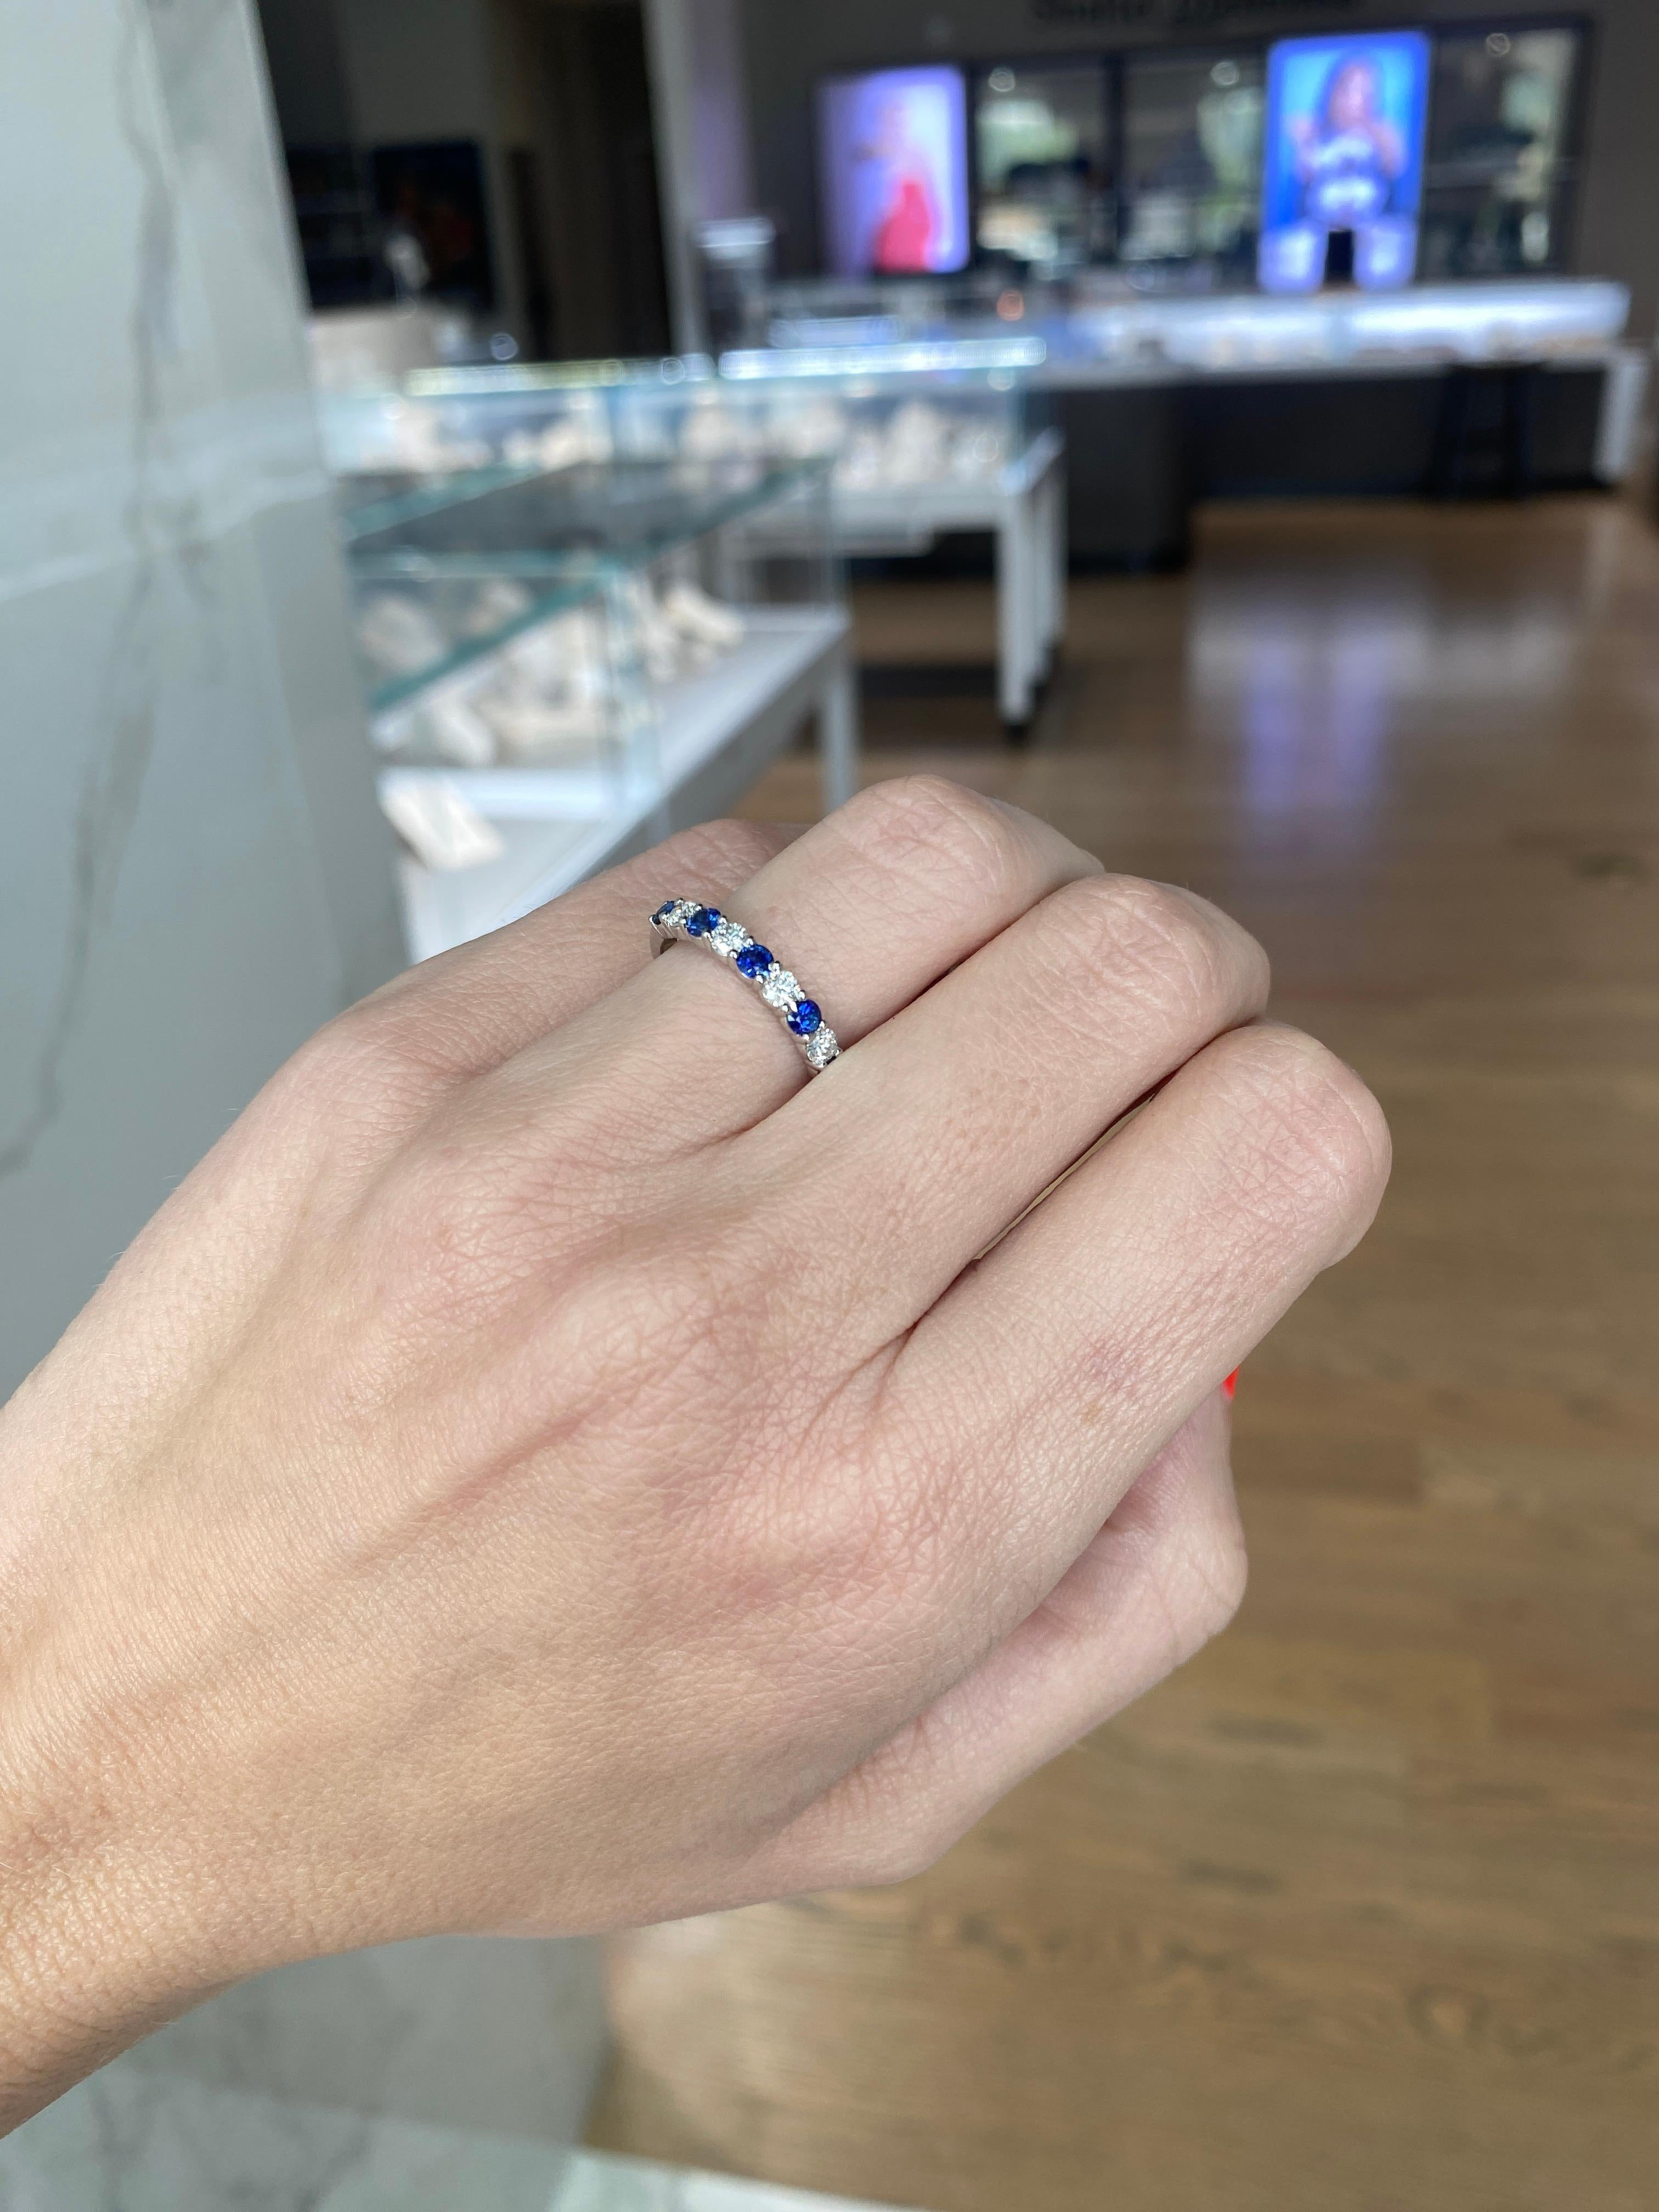 This band features 0.49 carat total weight in natural round blue sapphires alternating with 0.37 carat total weight in natural round diamonds set in 14 karat white gold. Stack with your other favorite rings or wear alone. This ring is a size 6.25